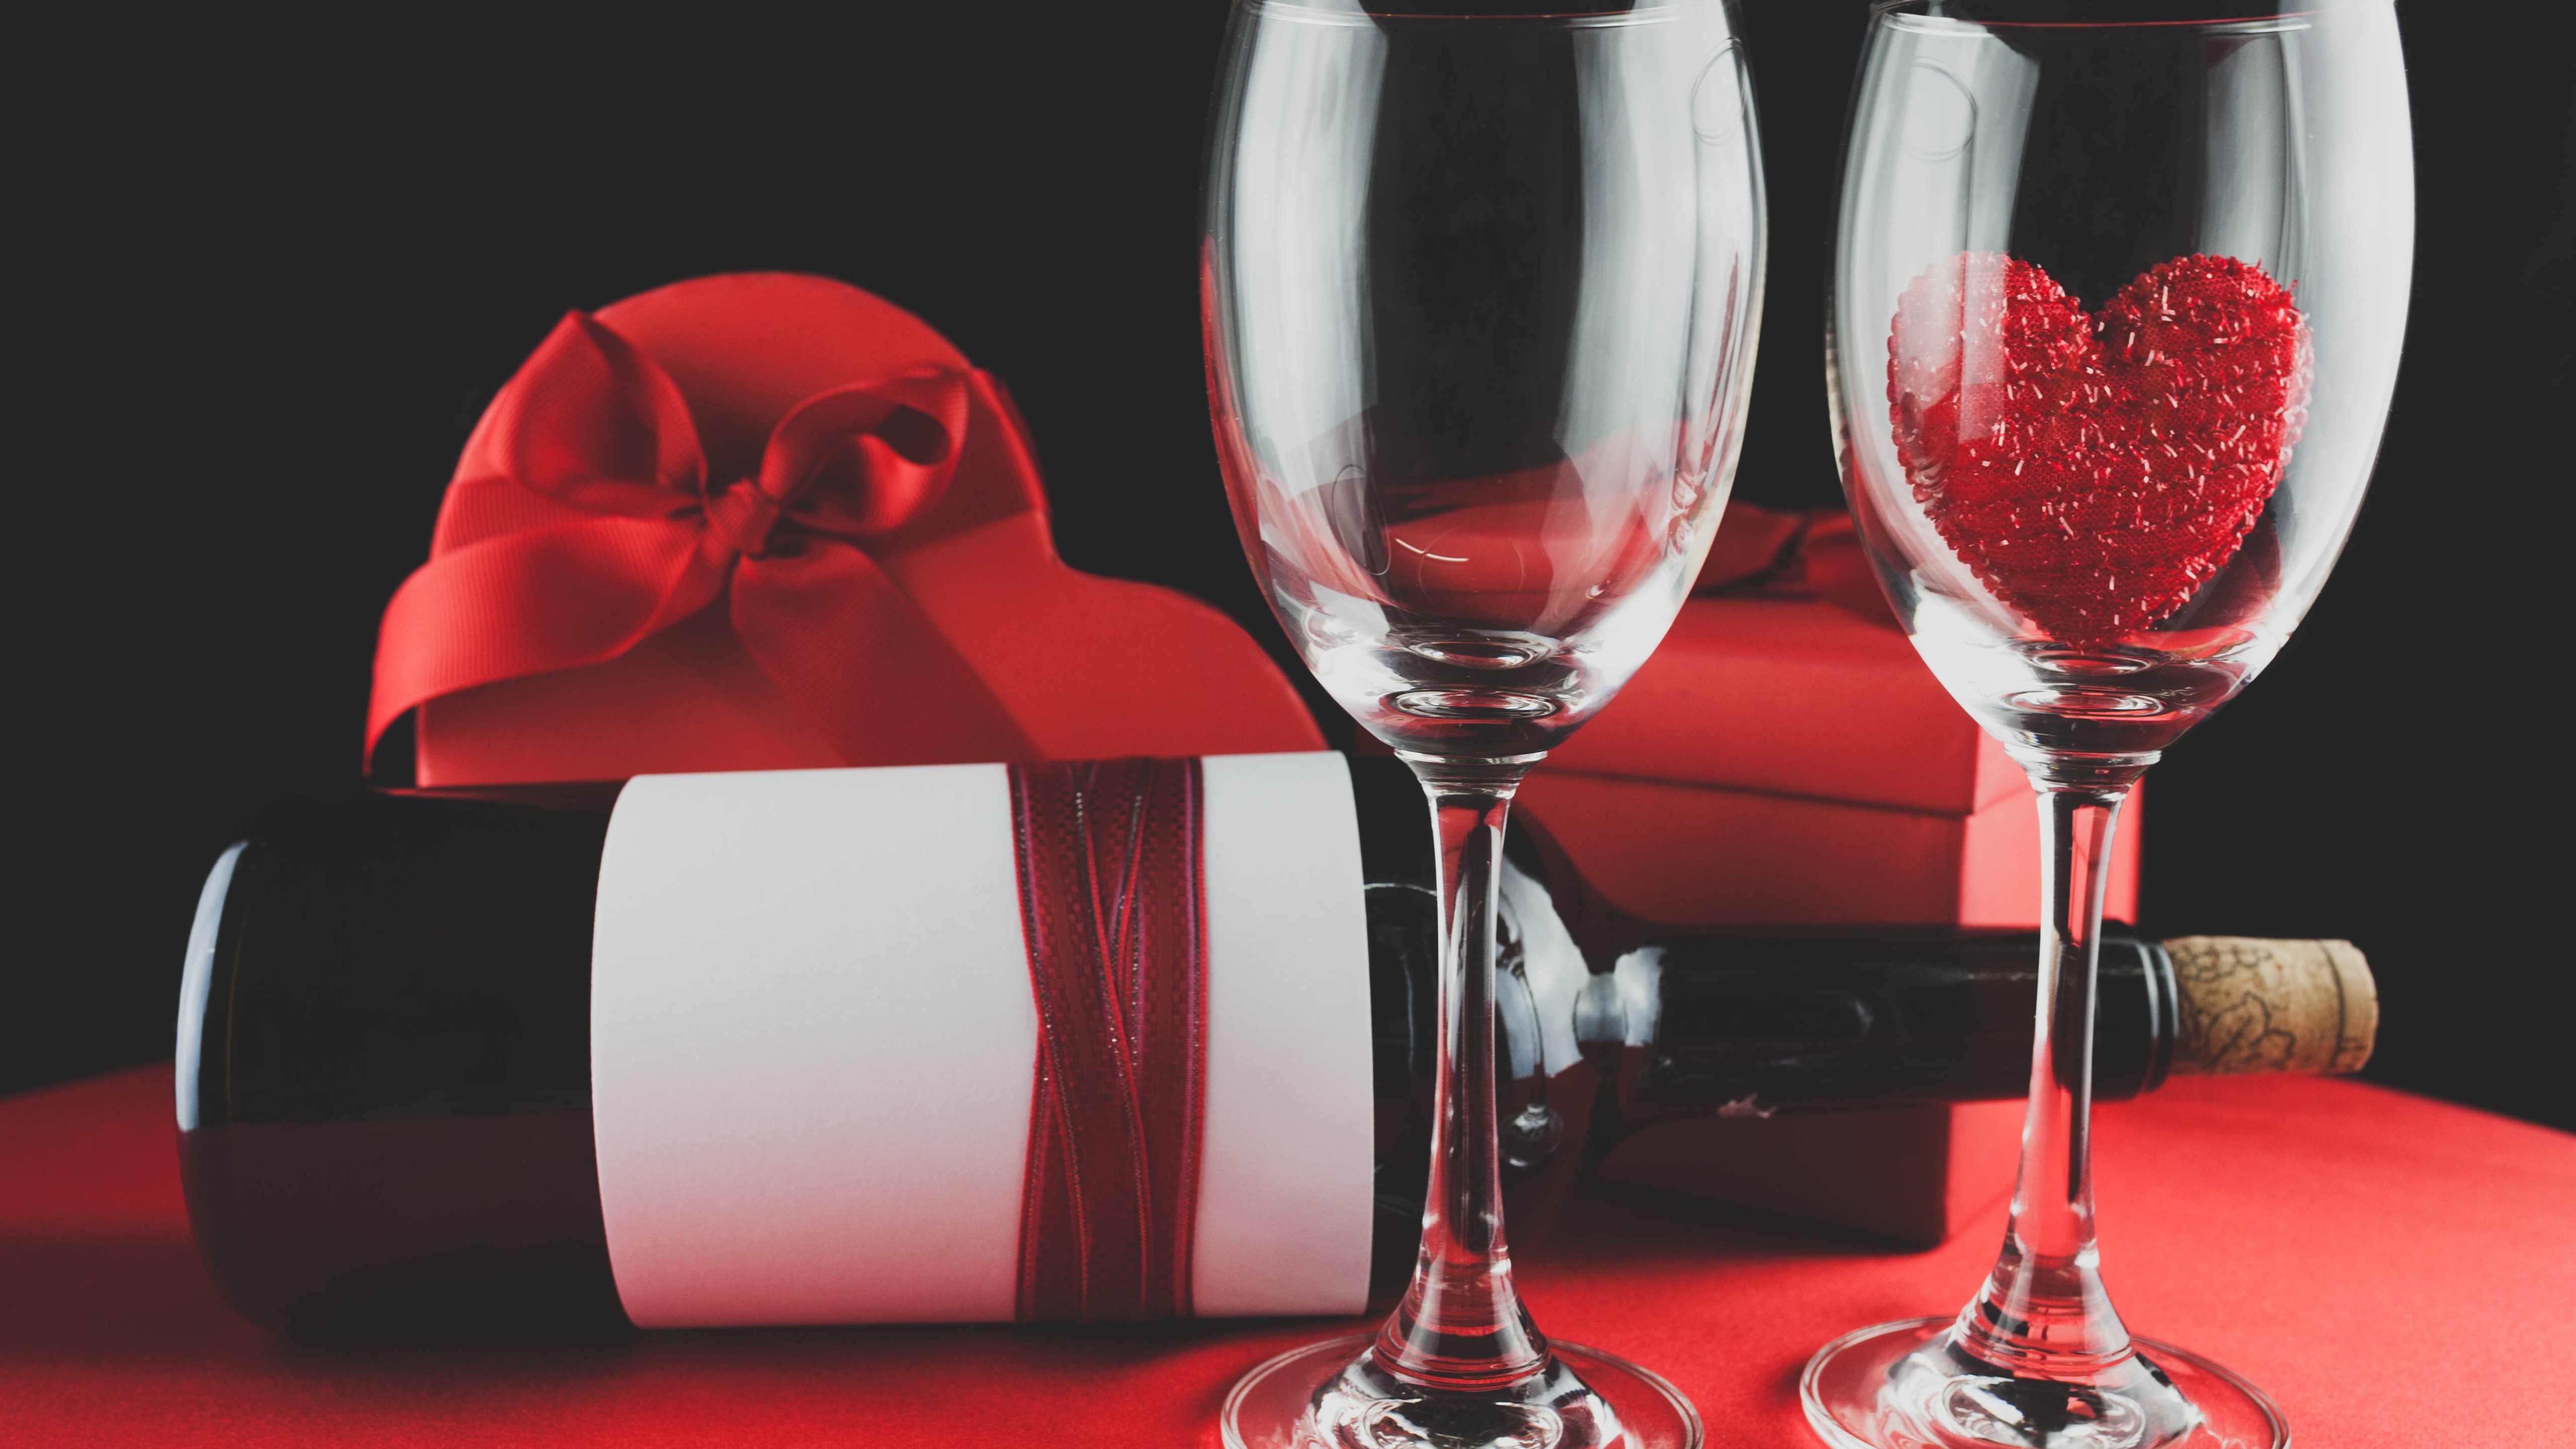 Wallpaper Two Glass Cups, Wine, Love Heart, Gifts - Valentine Food Photography - HD Wallpaper 